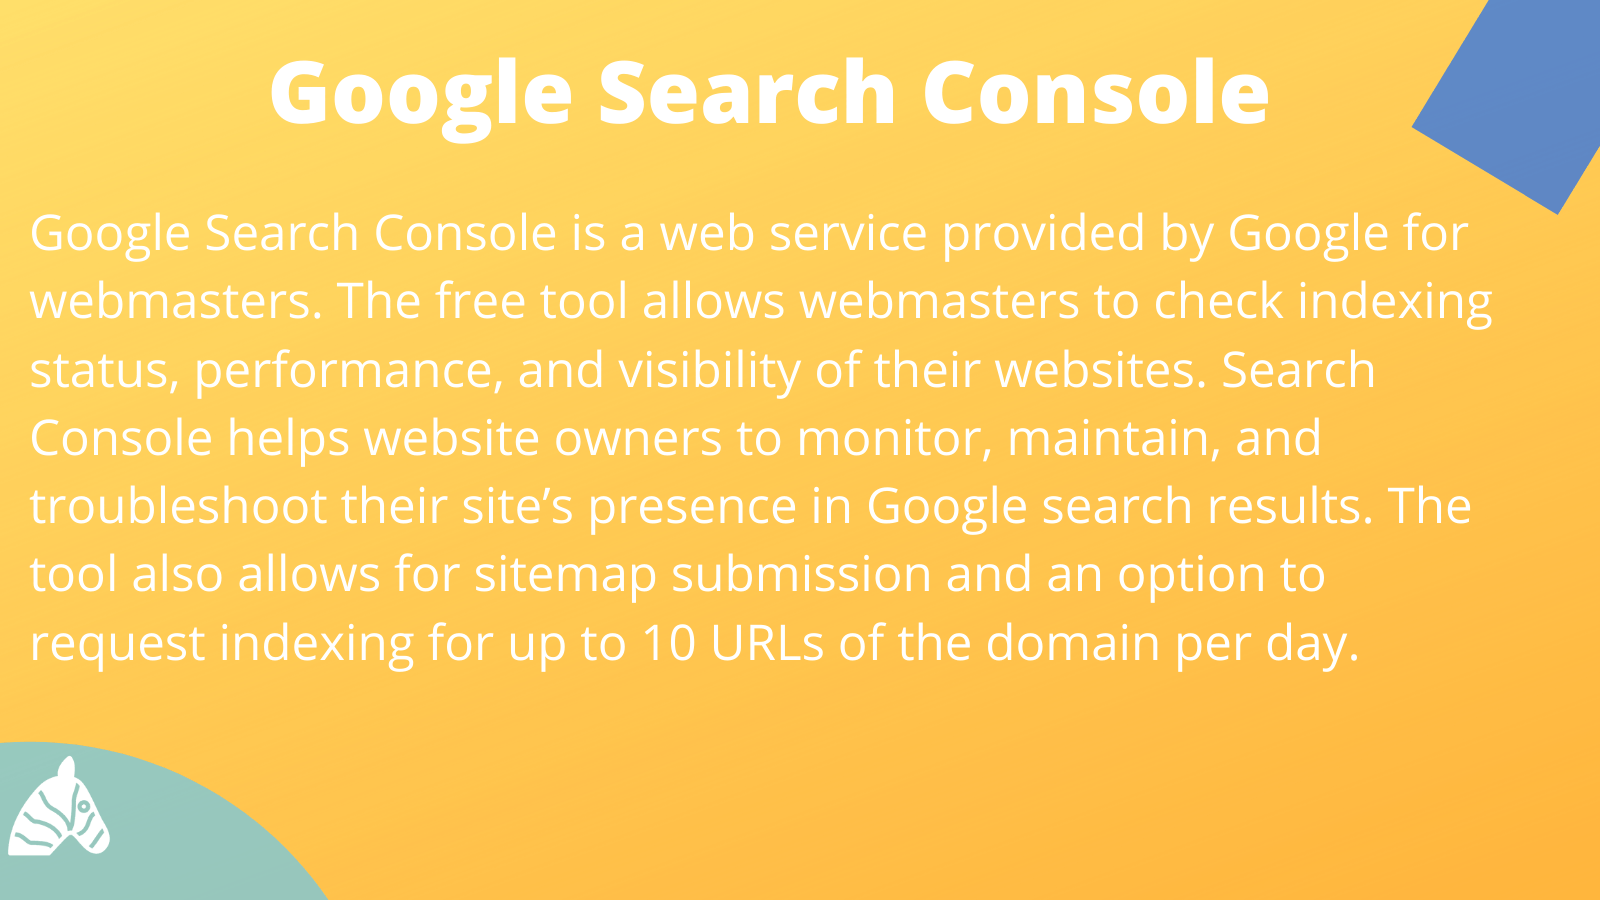 Information on Google Search Console for Indexing